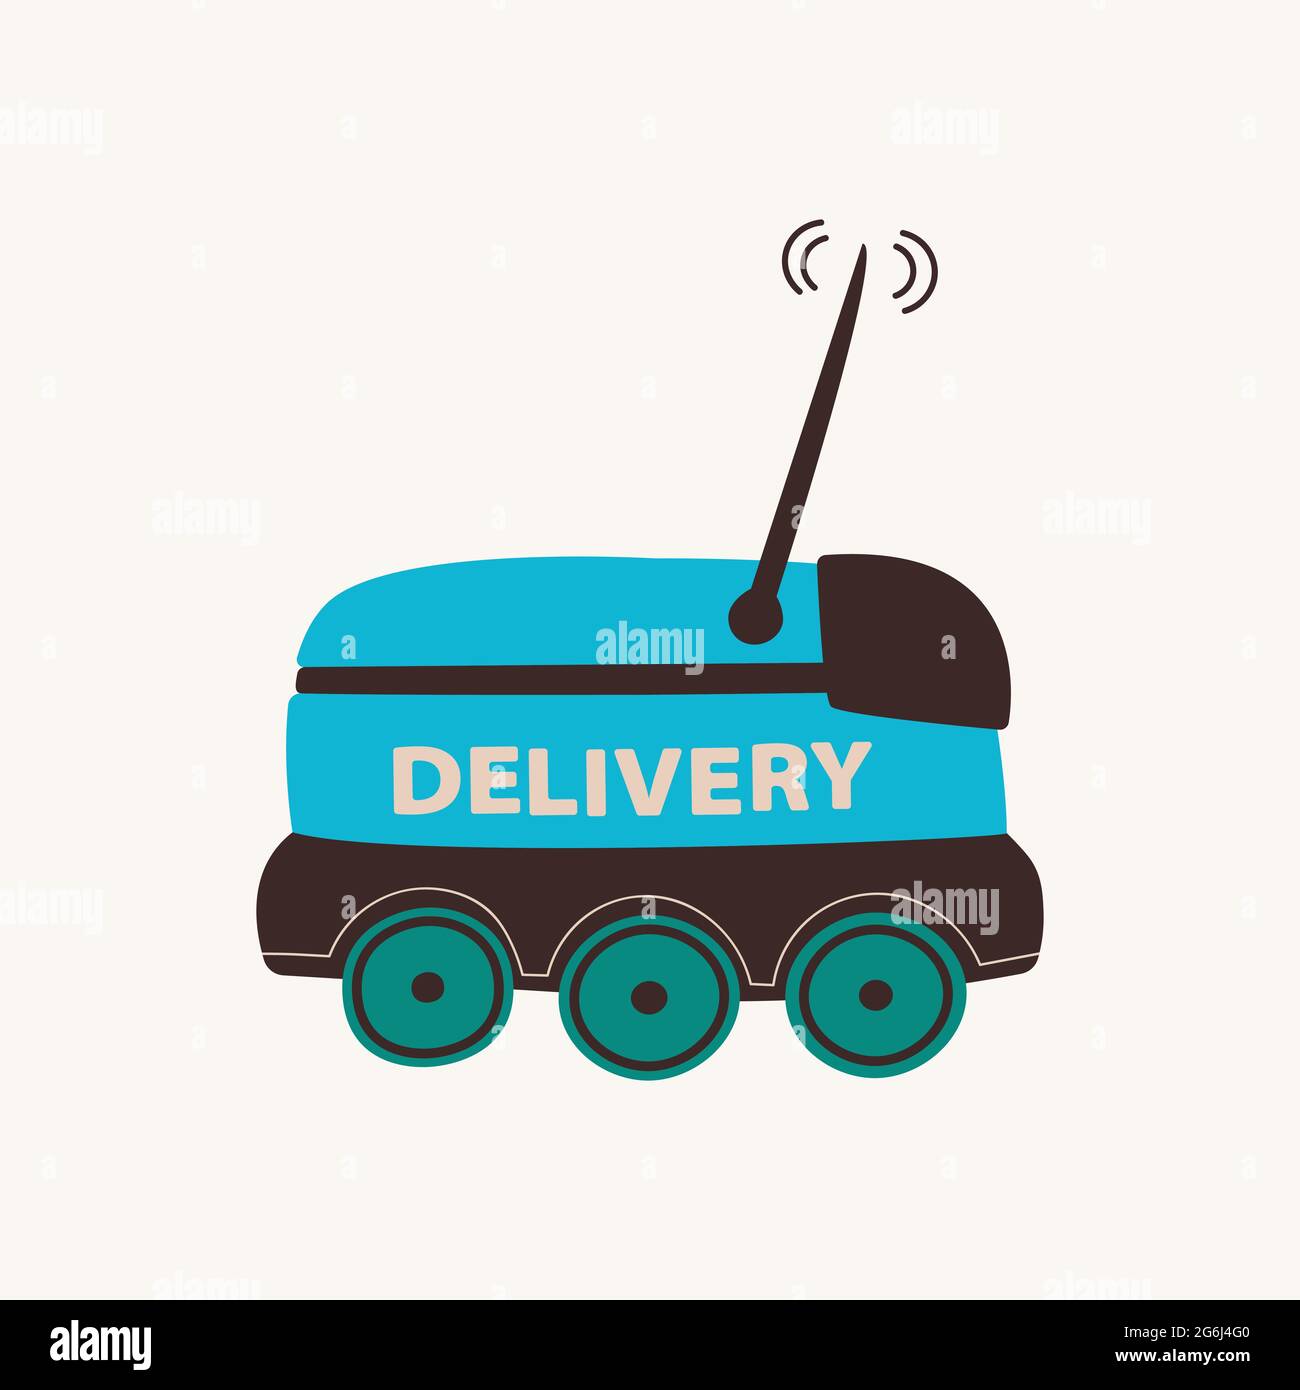 Delivery Robot. Unmanned delivery service on wheels. Smart bot for transporting food and goods. Vector cartoon isolated element for design. Stock Vector